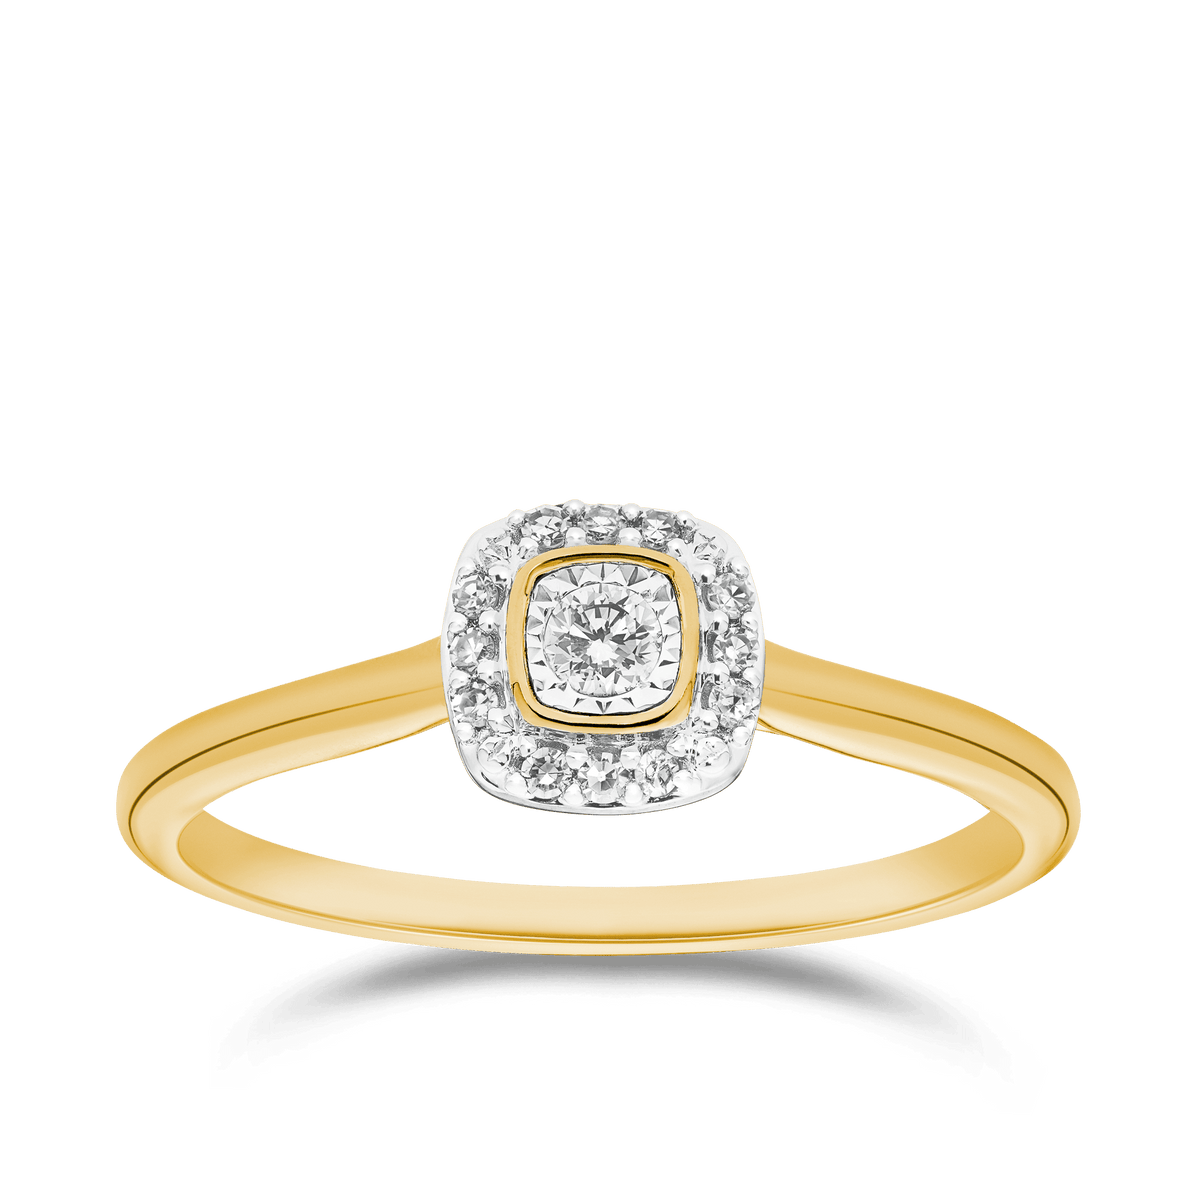 I Will Diamond Ring in 9ct Yellow and White Gold TGW 0.11ct - Wallace Bishop